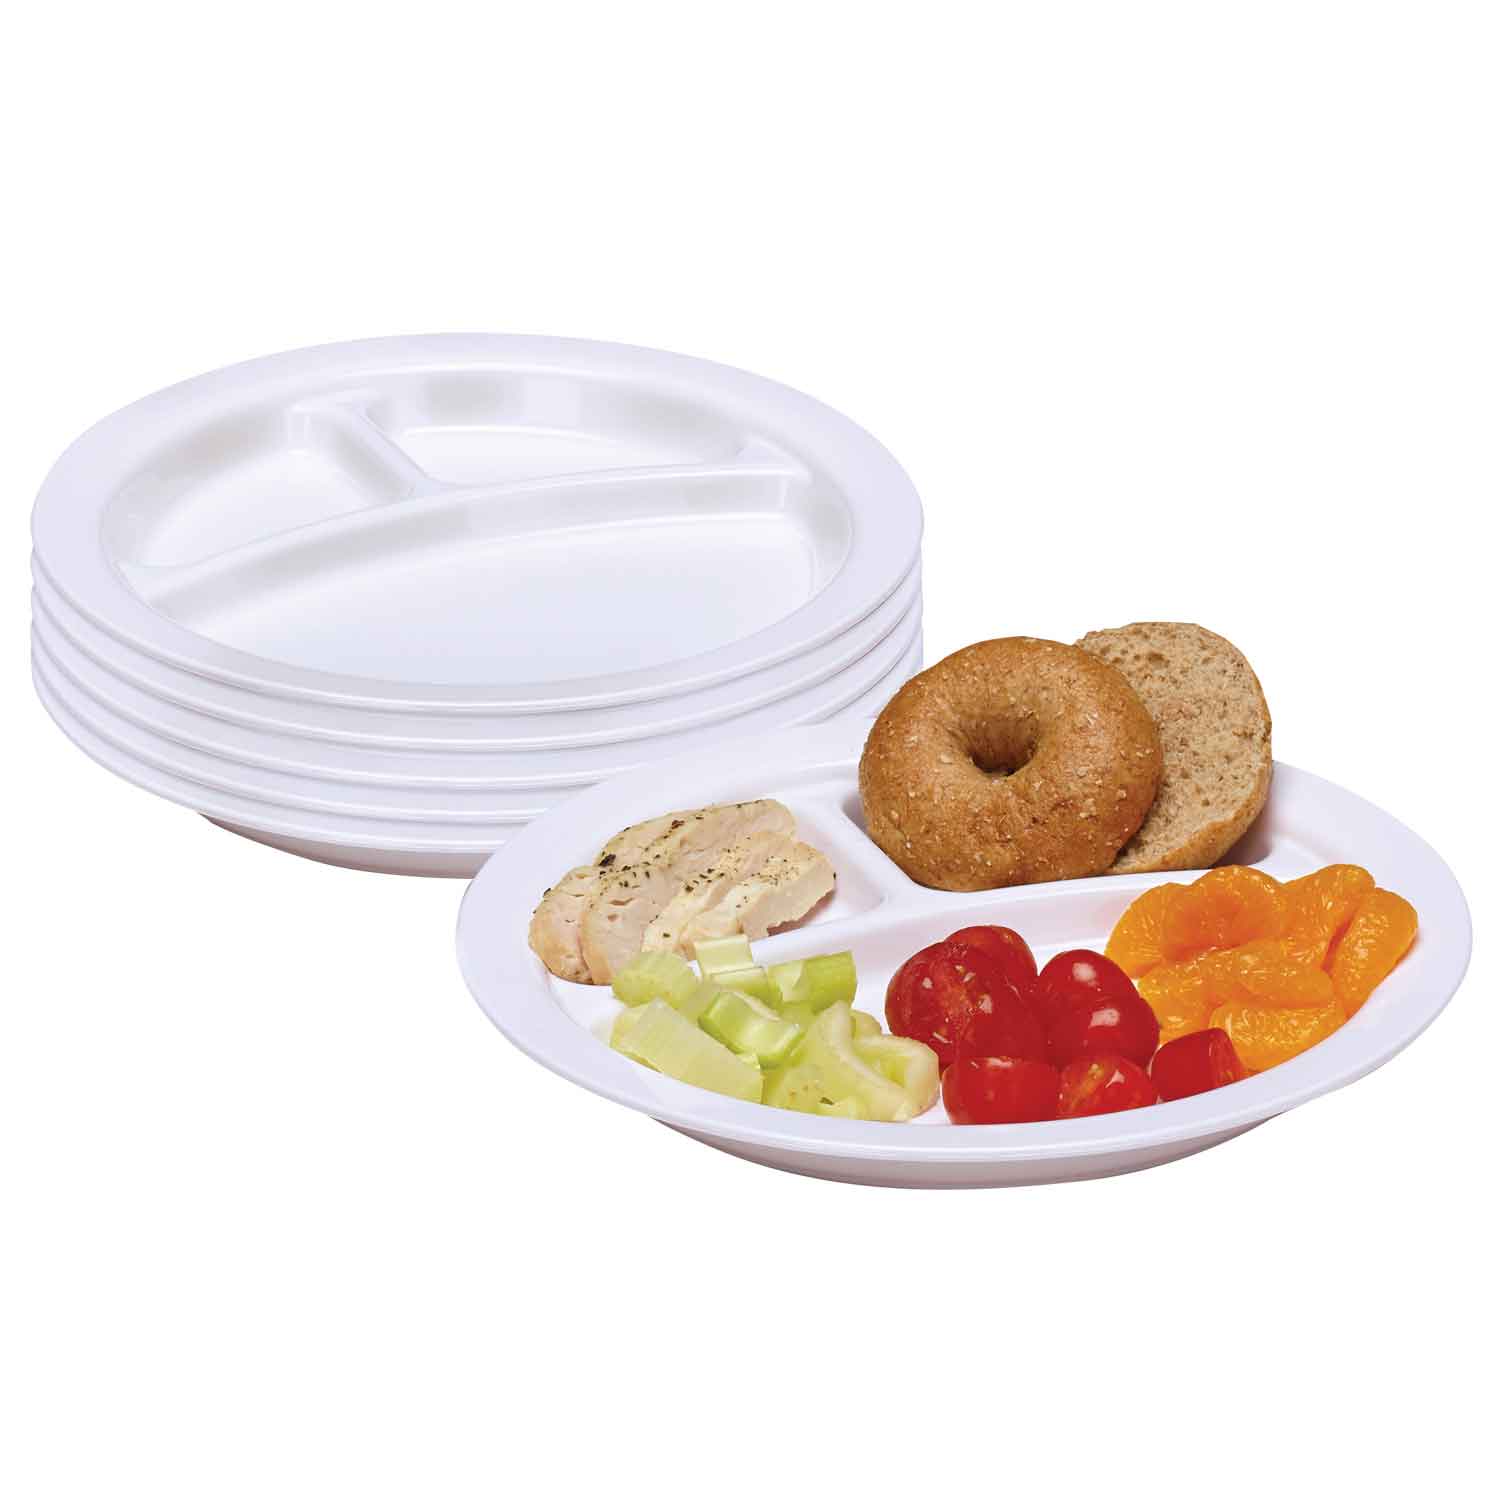 Family Style Dining Divided Plates